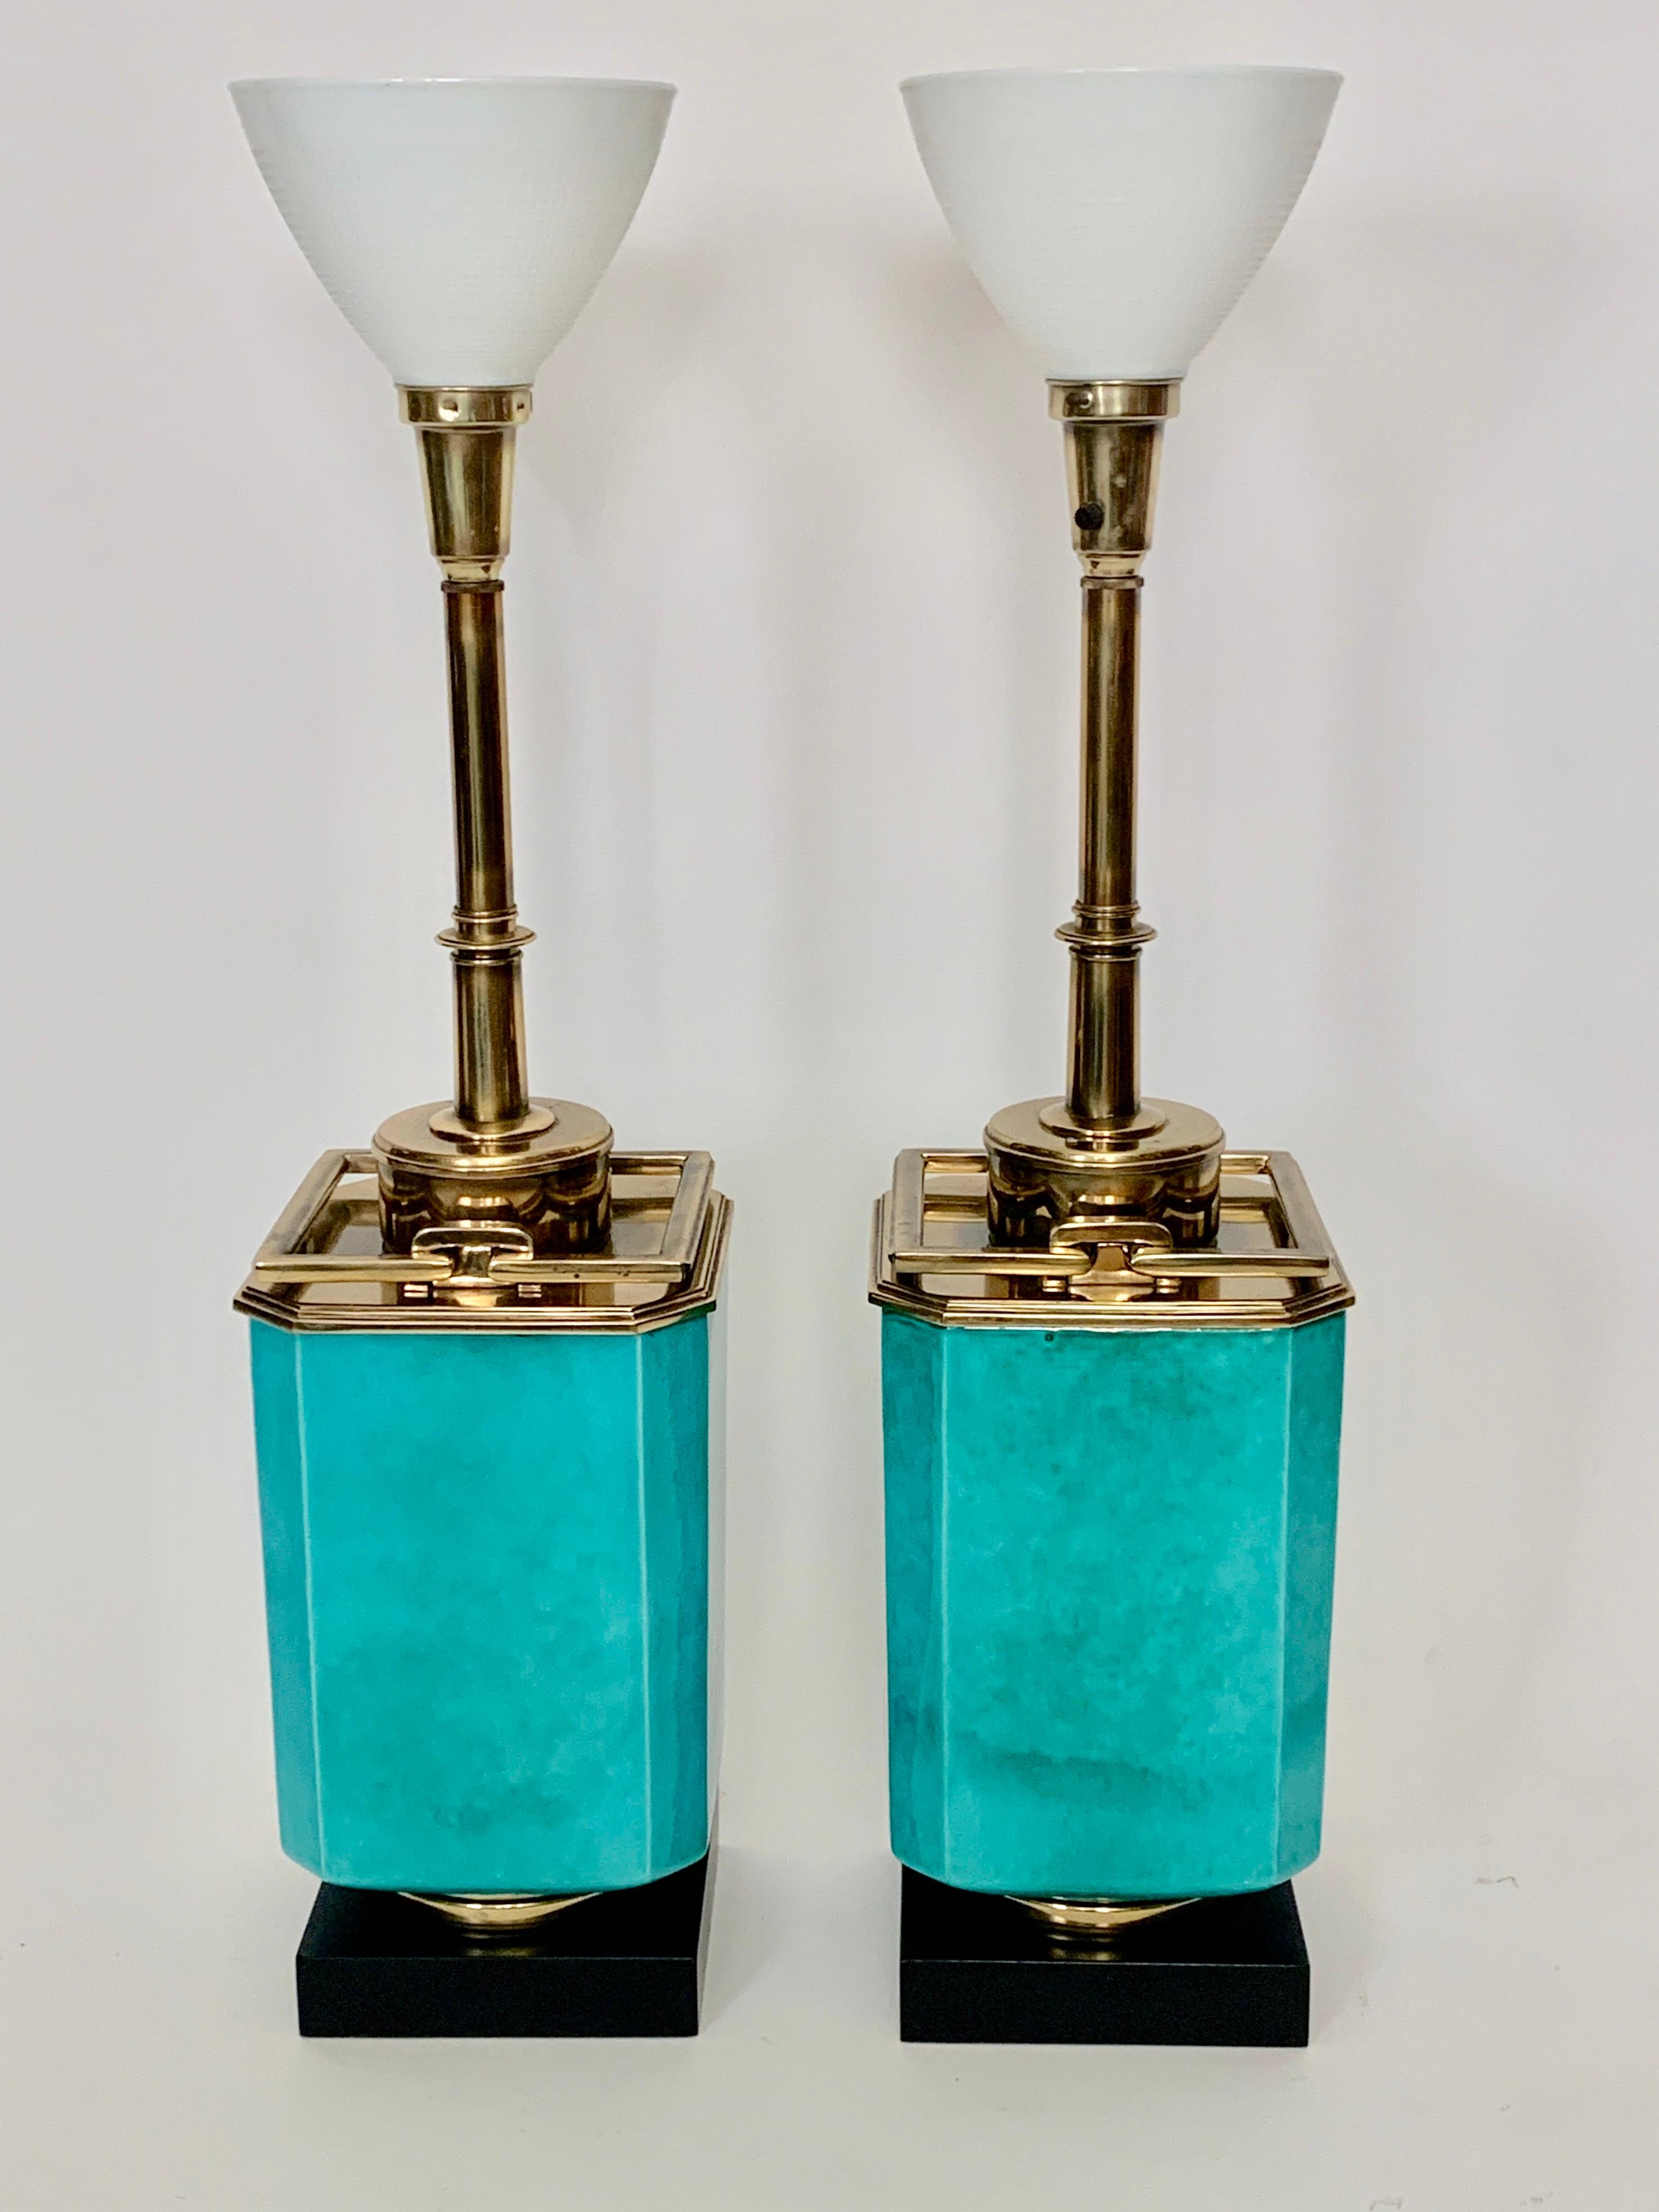 Substantial pair of Edwin Cole for Stiffel turquoise ceramic and bright brass table lamps, circa 1950. Featuring reflective Blue Green glazed ceramic bodies, solid bright brass hardware, working brass handles, square black enameled wood base and